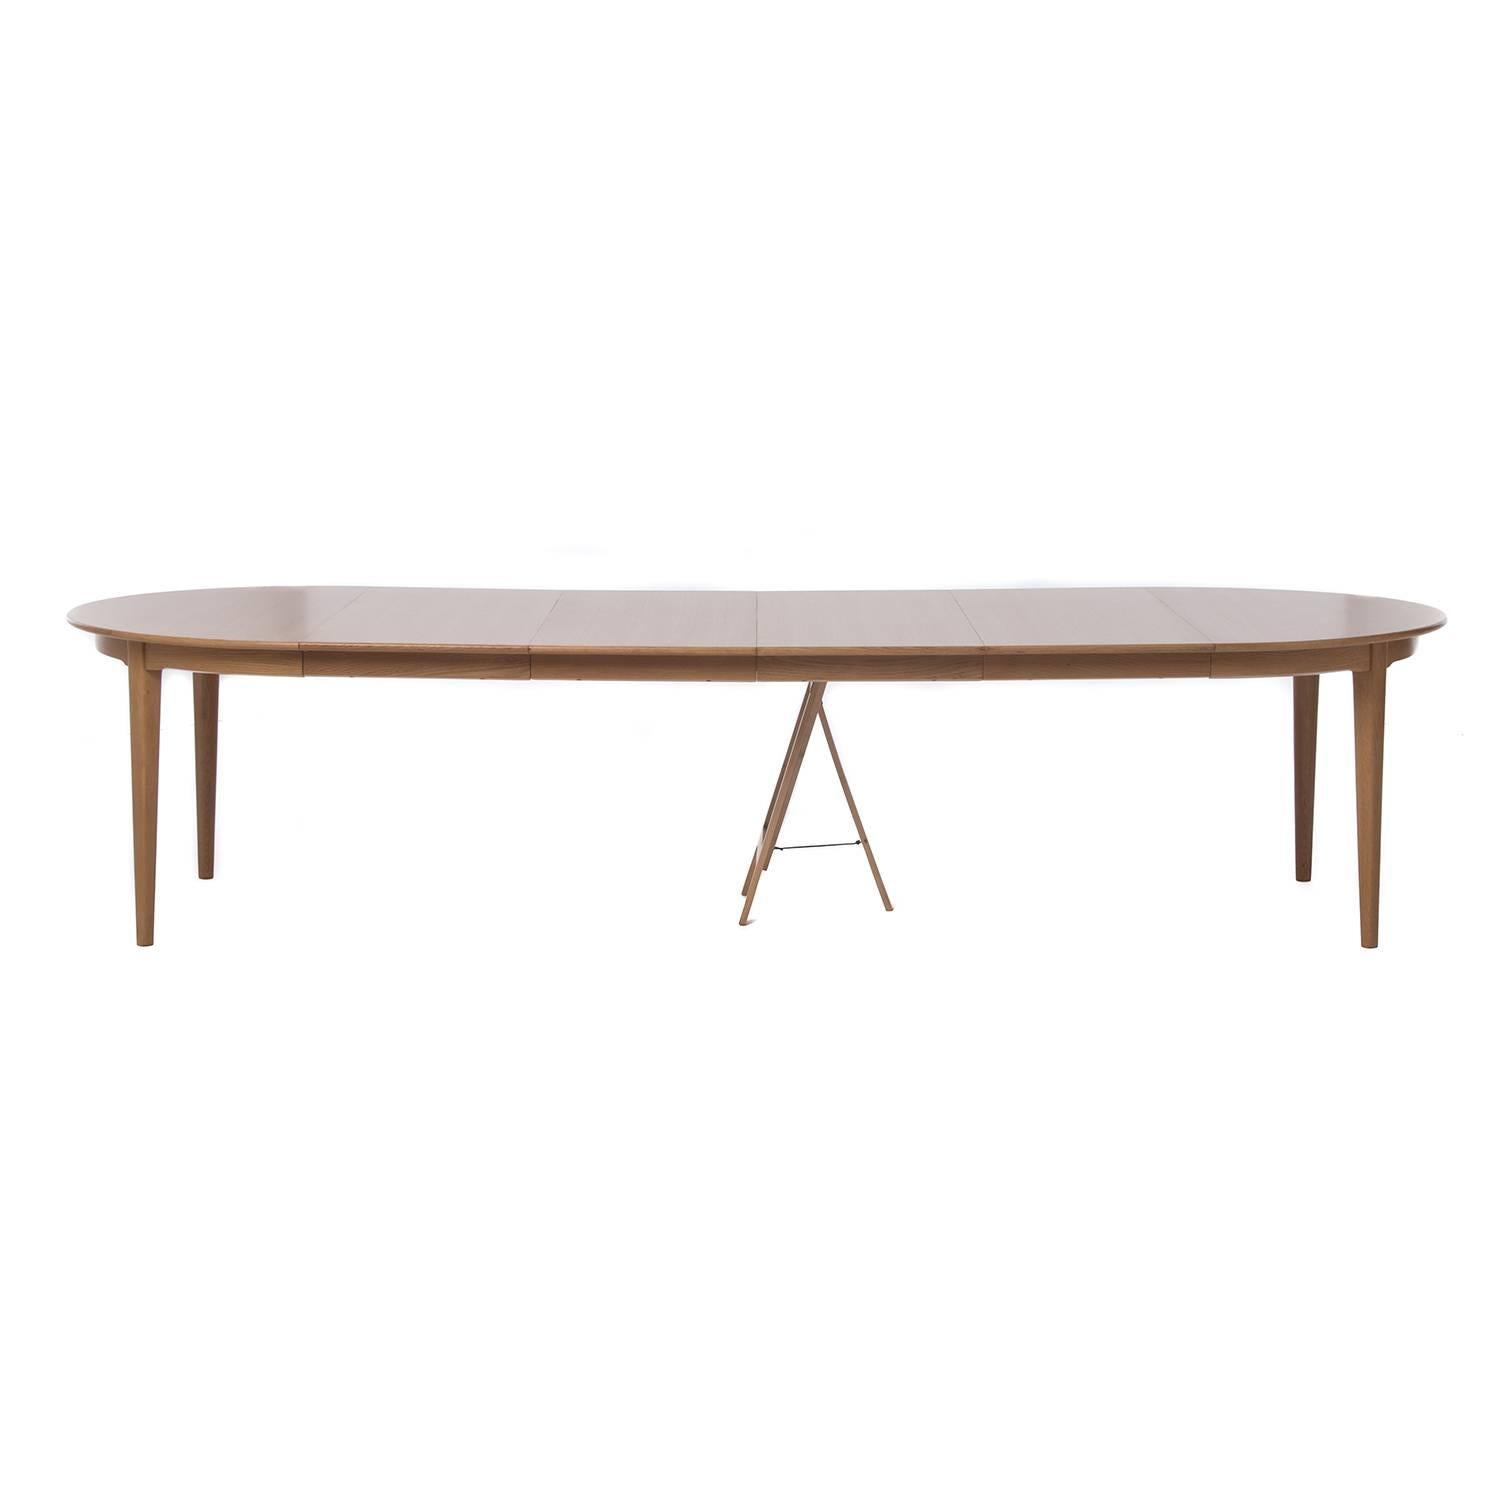 20th Century Danish Modern Dining Table with Four Leaves